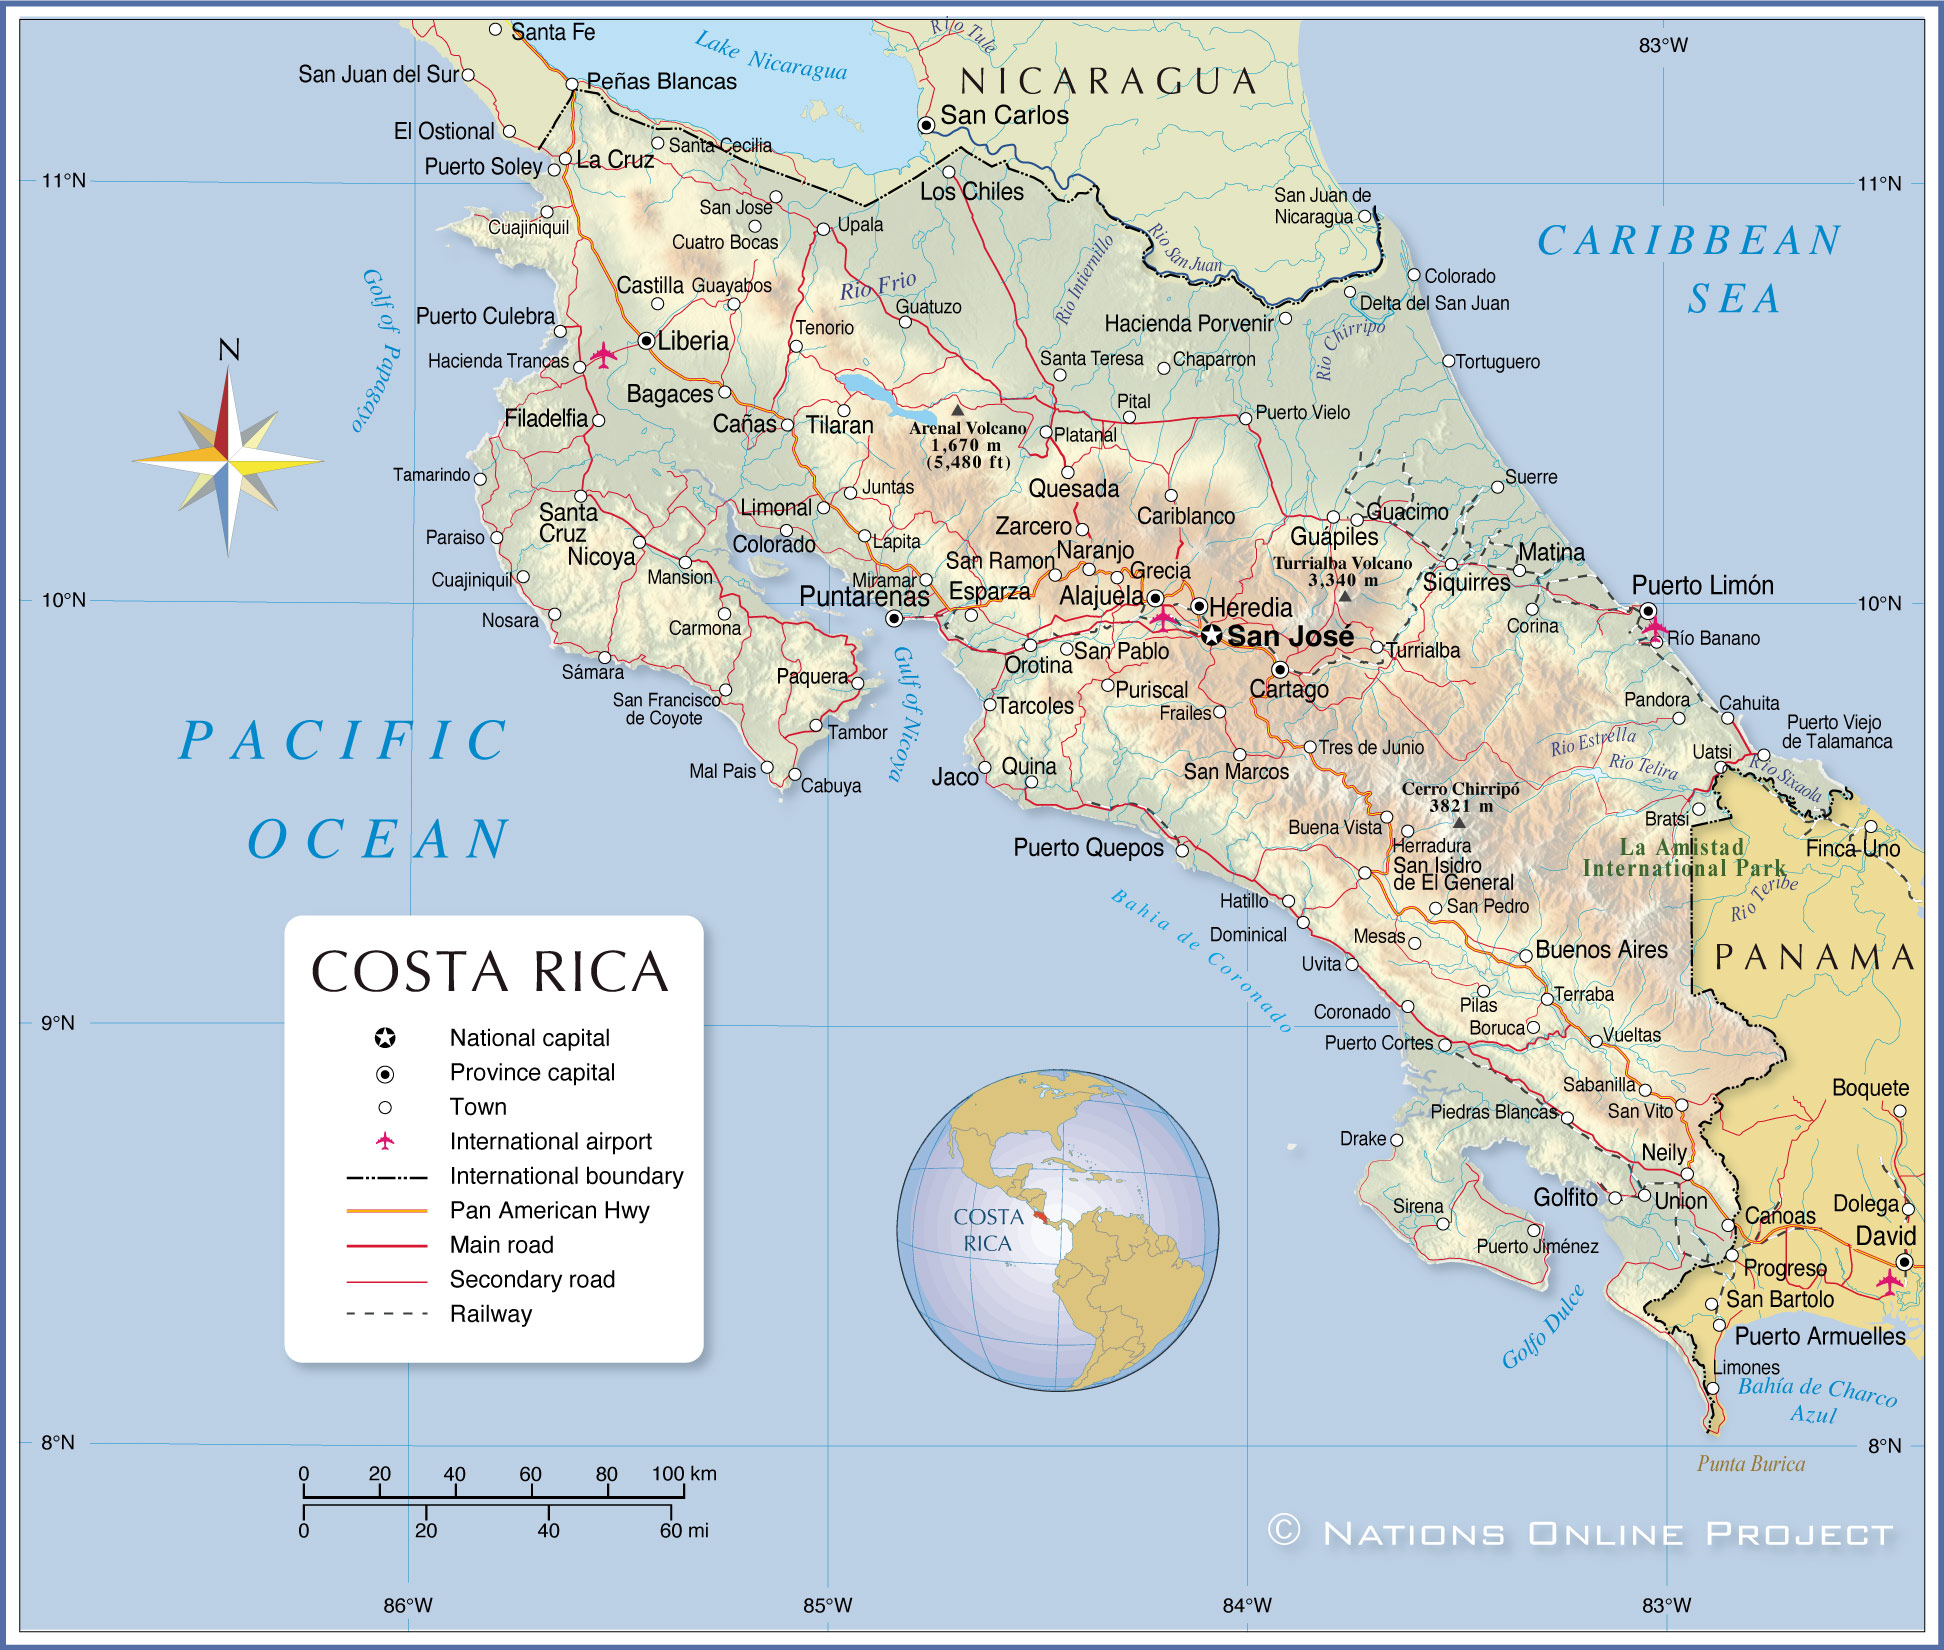 Detailed Map of Costa Rica - Nations Online Project